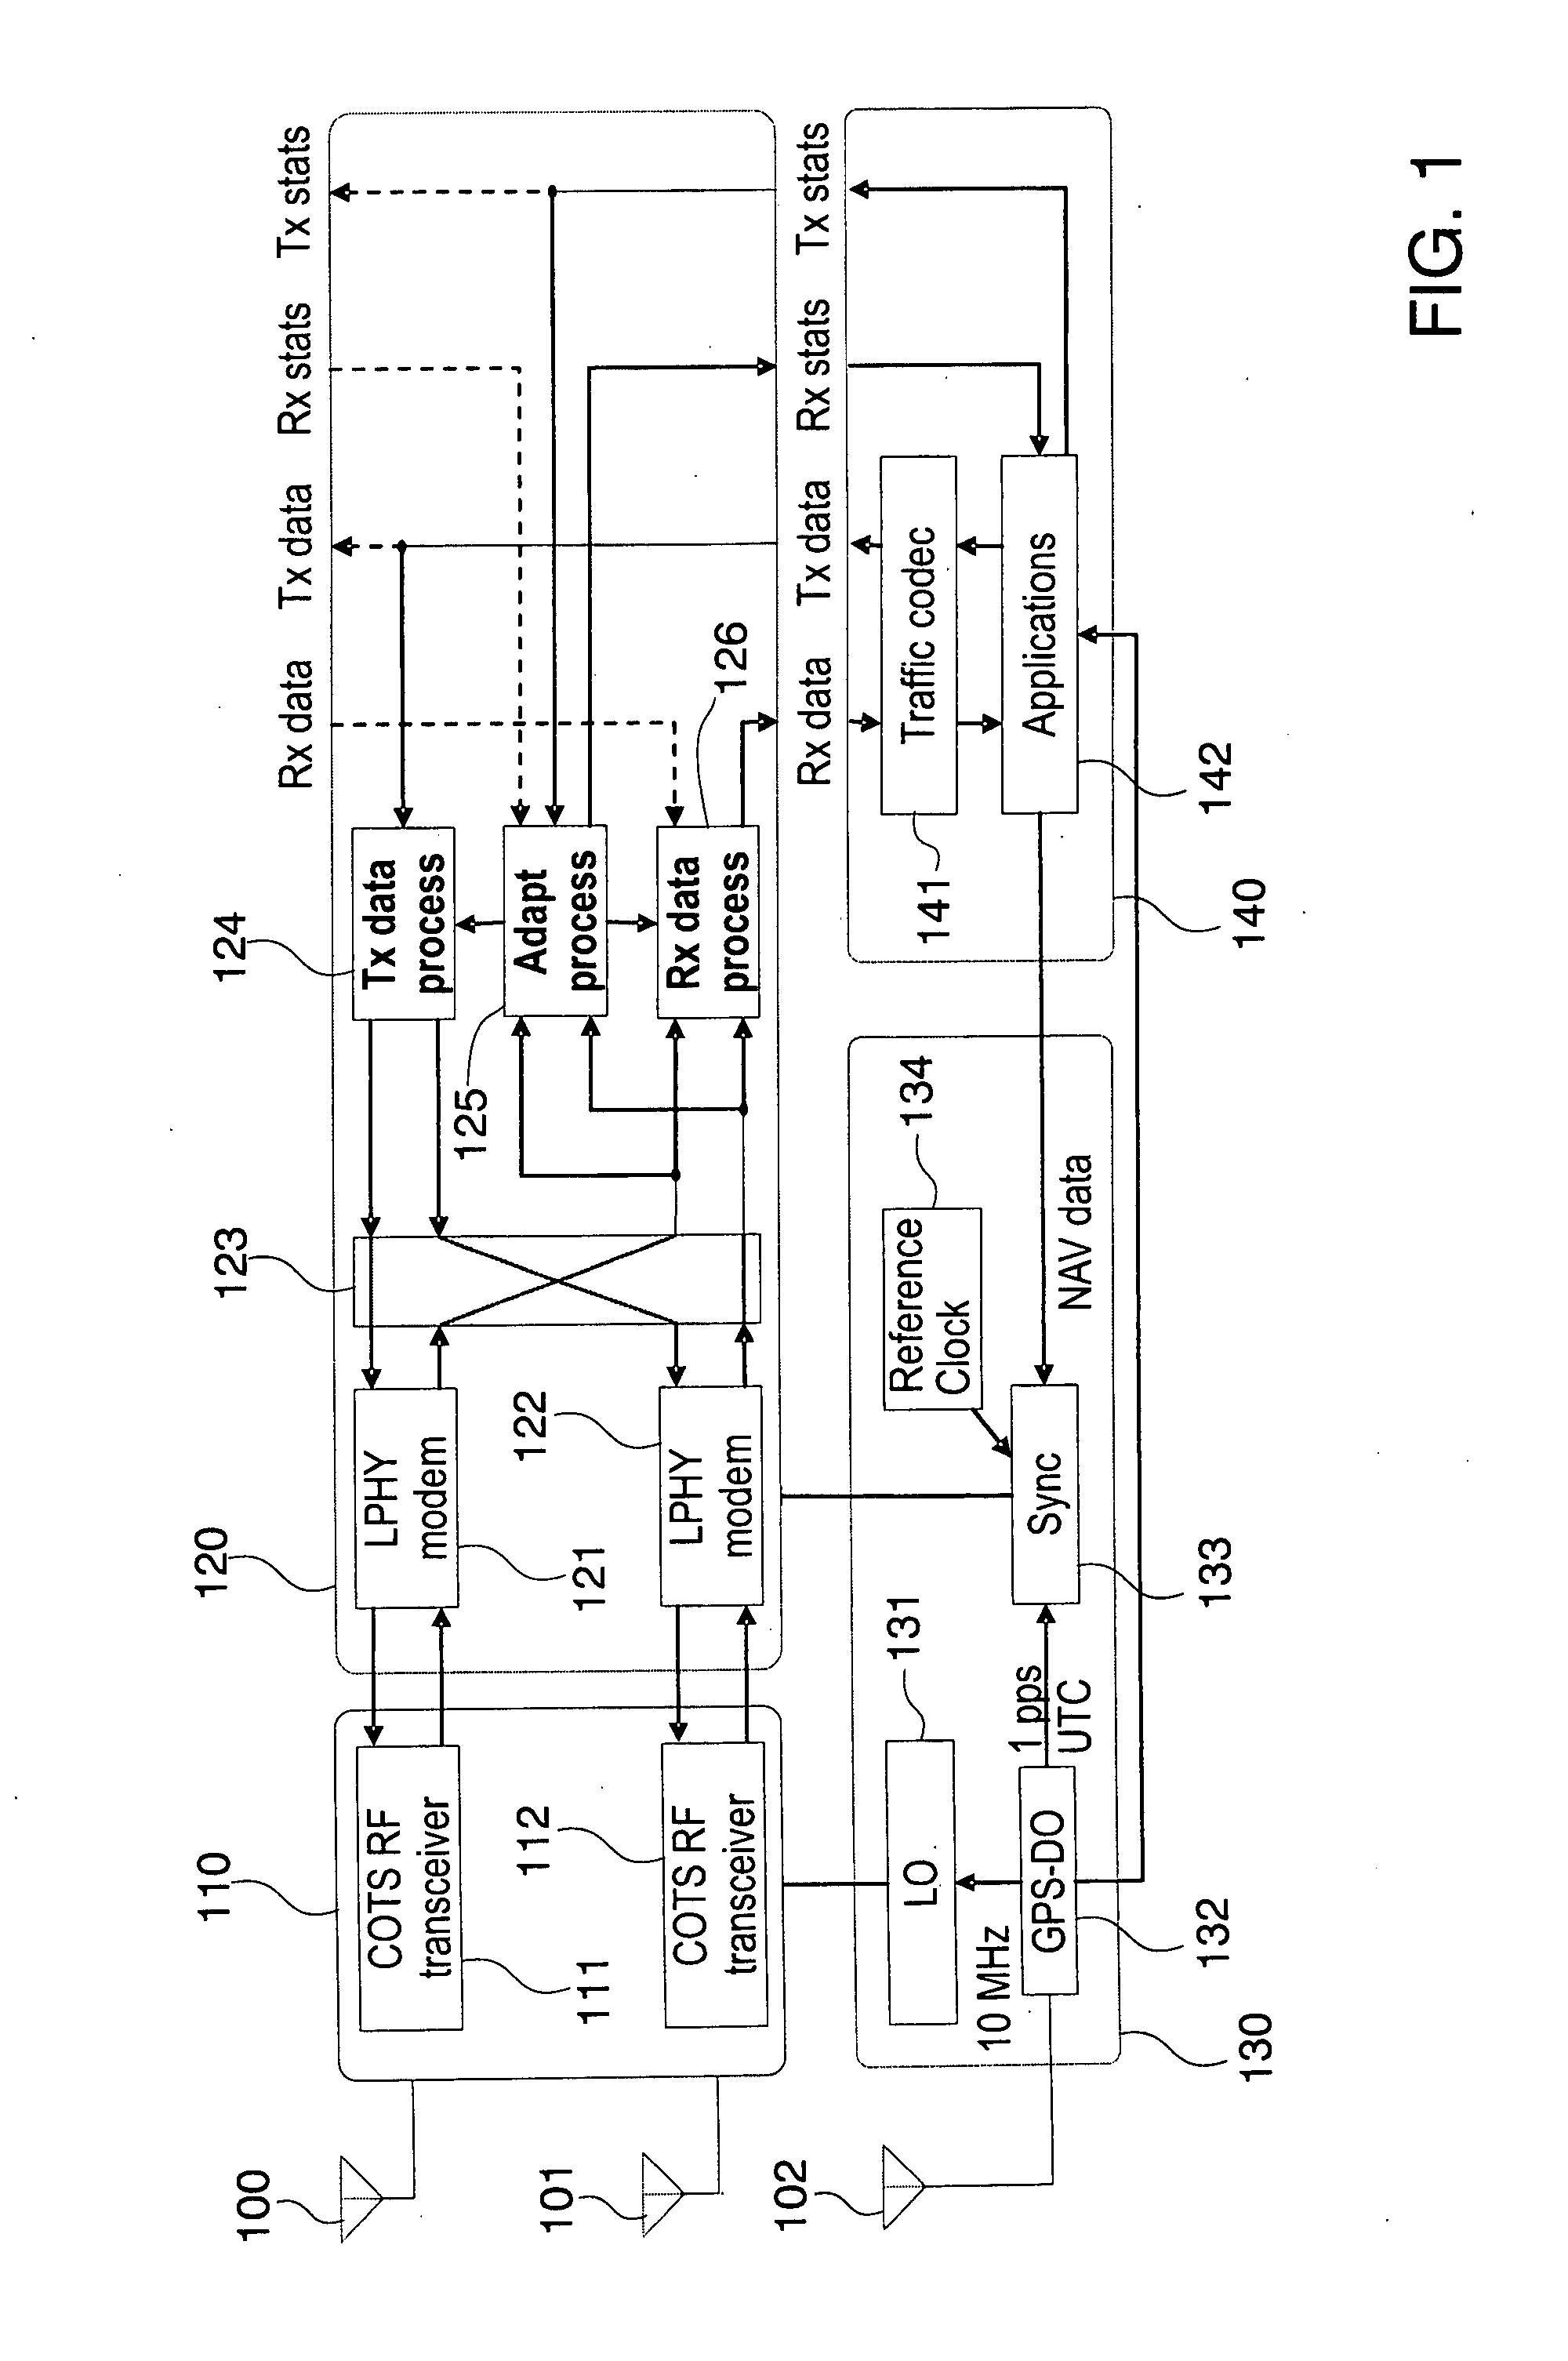 Method and system for robust, secure, and high-efficiency voice and packet transmission over ad-hoc, mesh, and MIMO communication networks